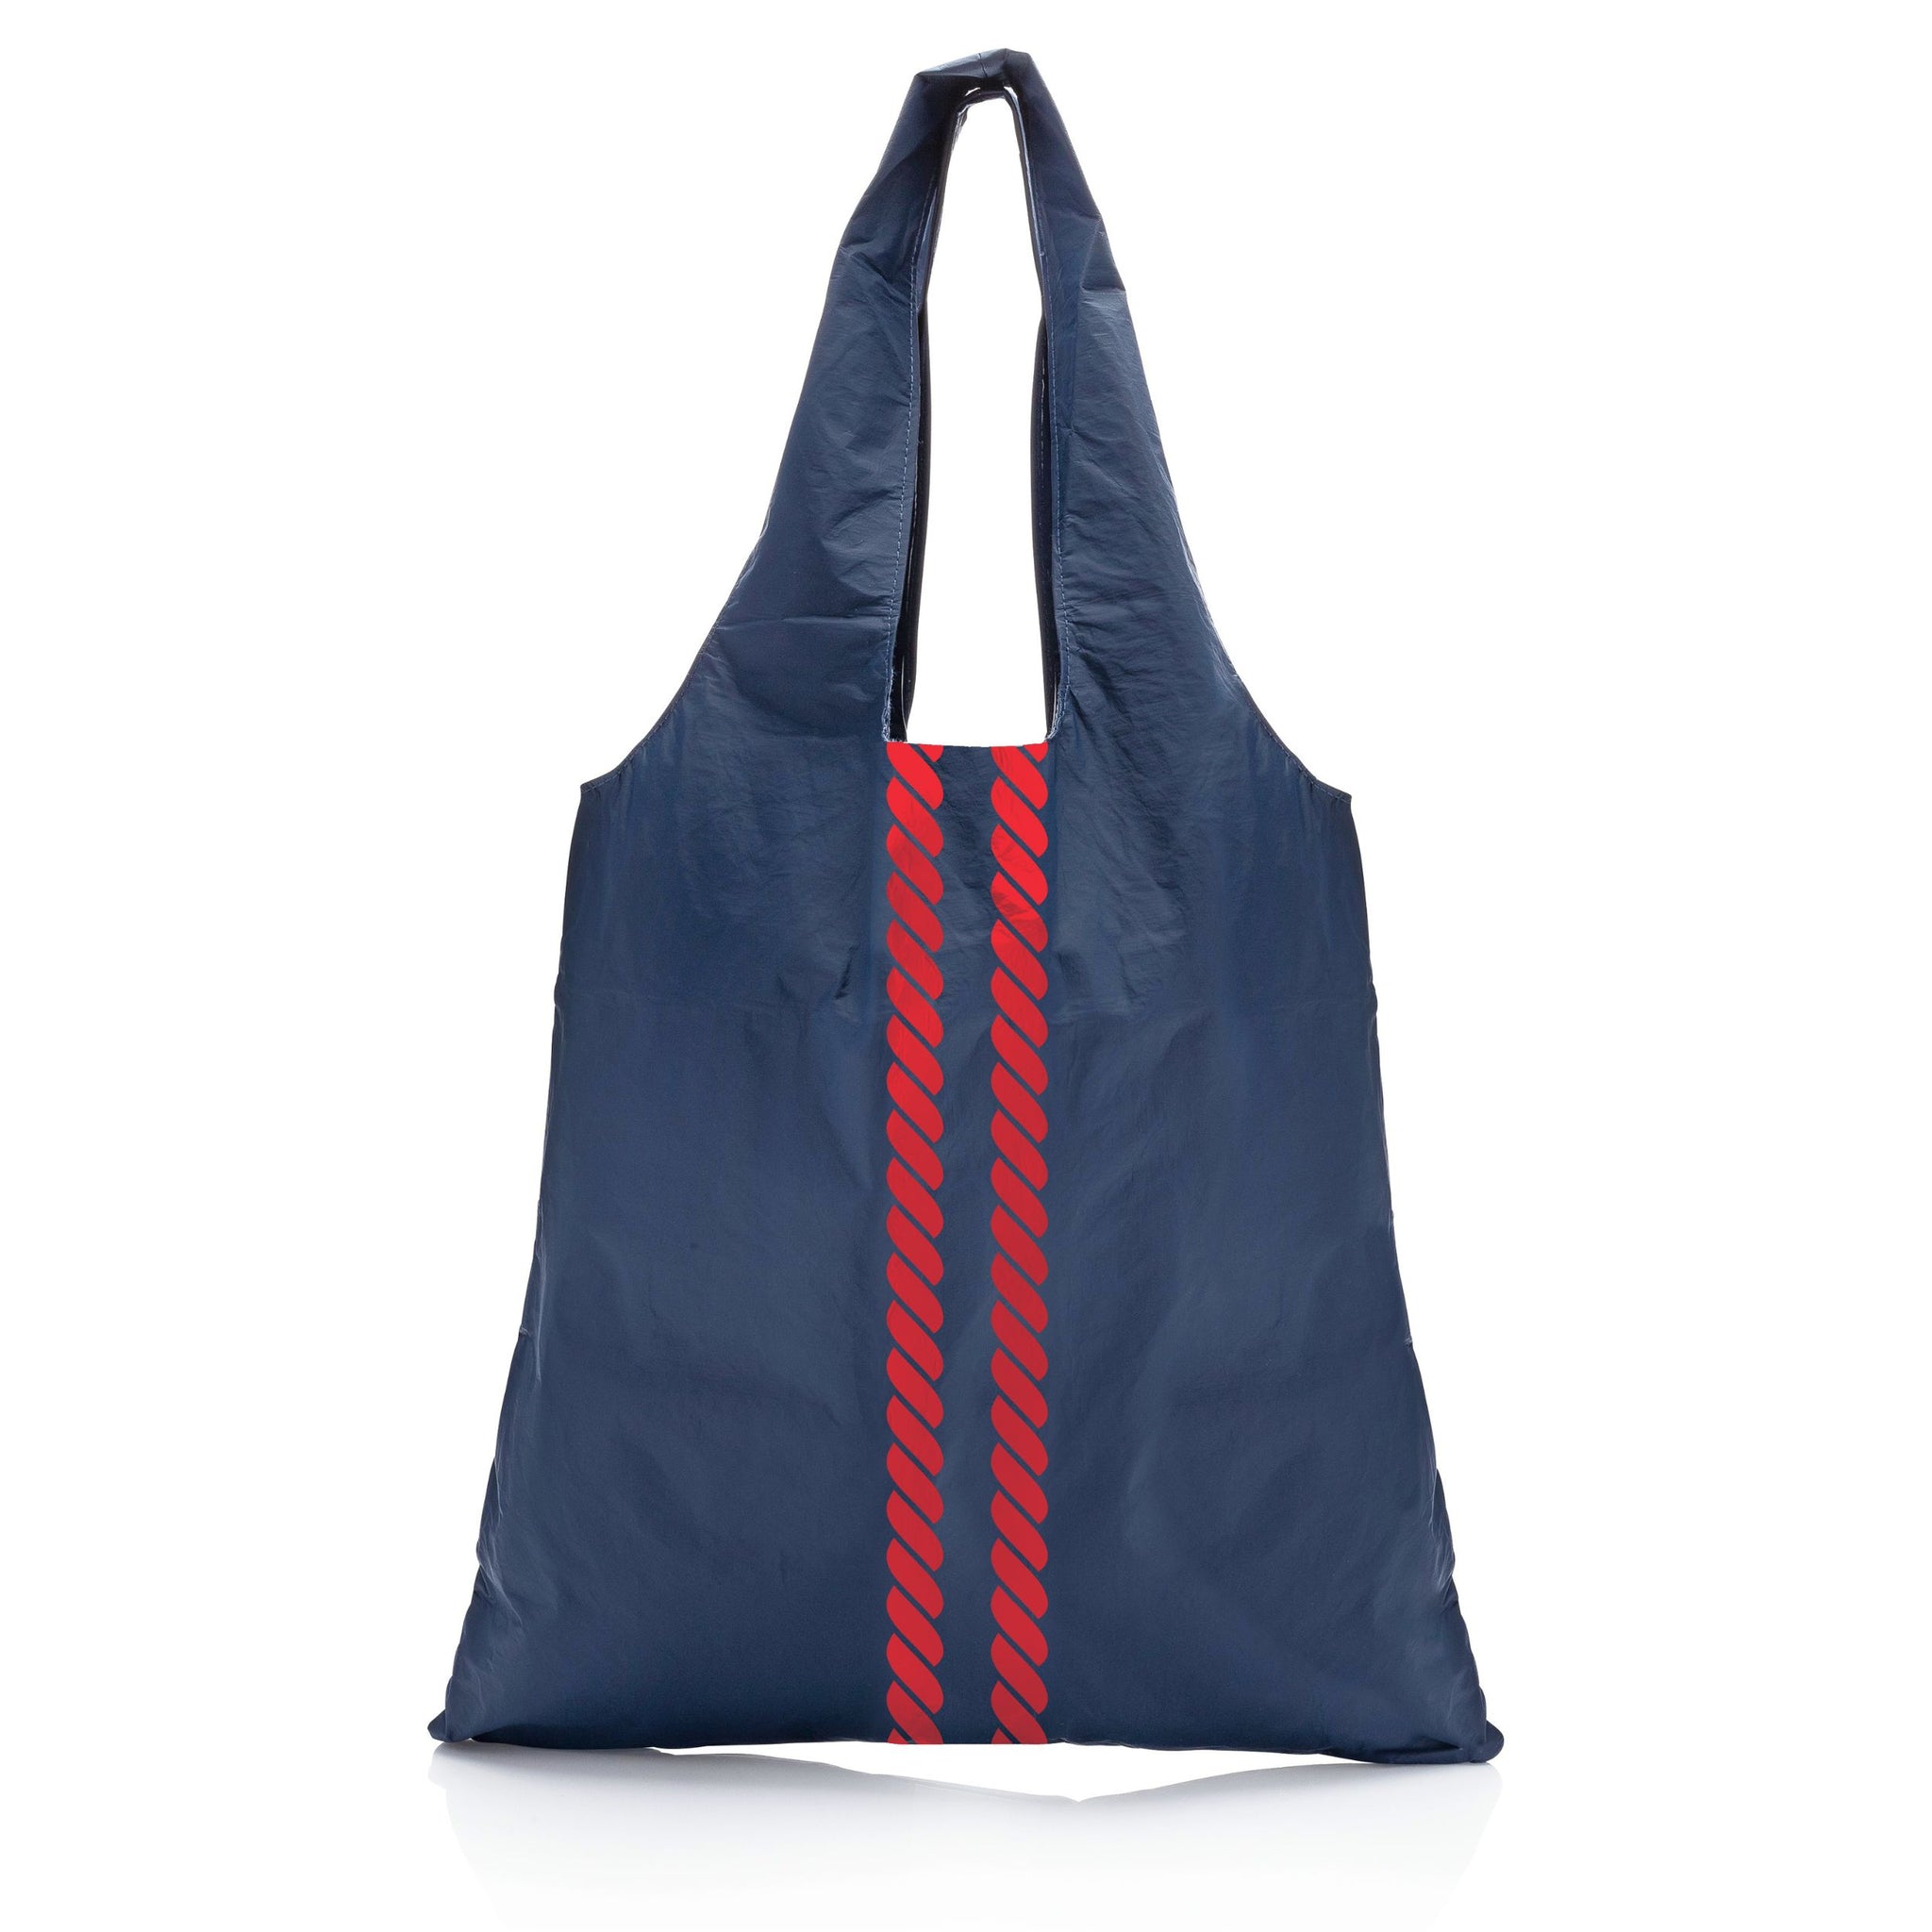 tote bag in navy with red stripes